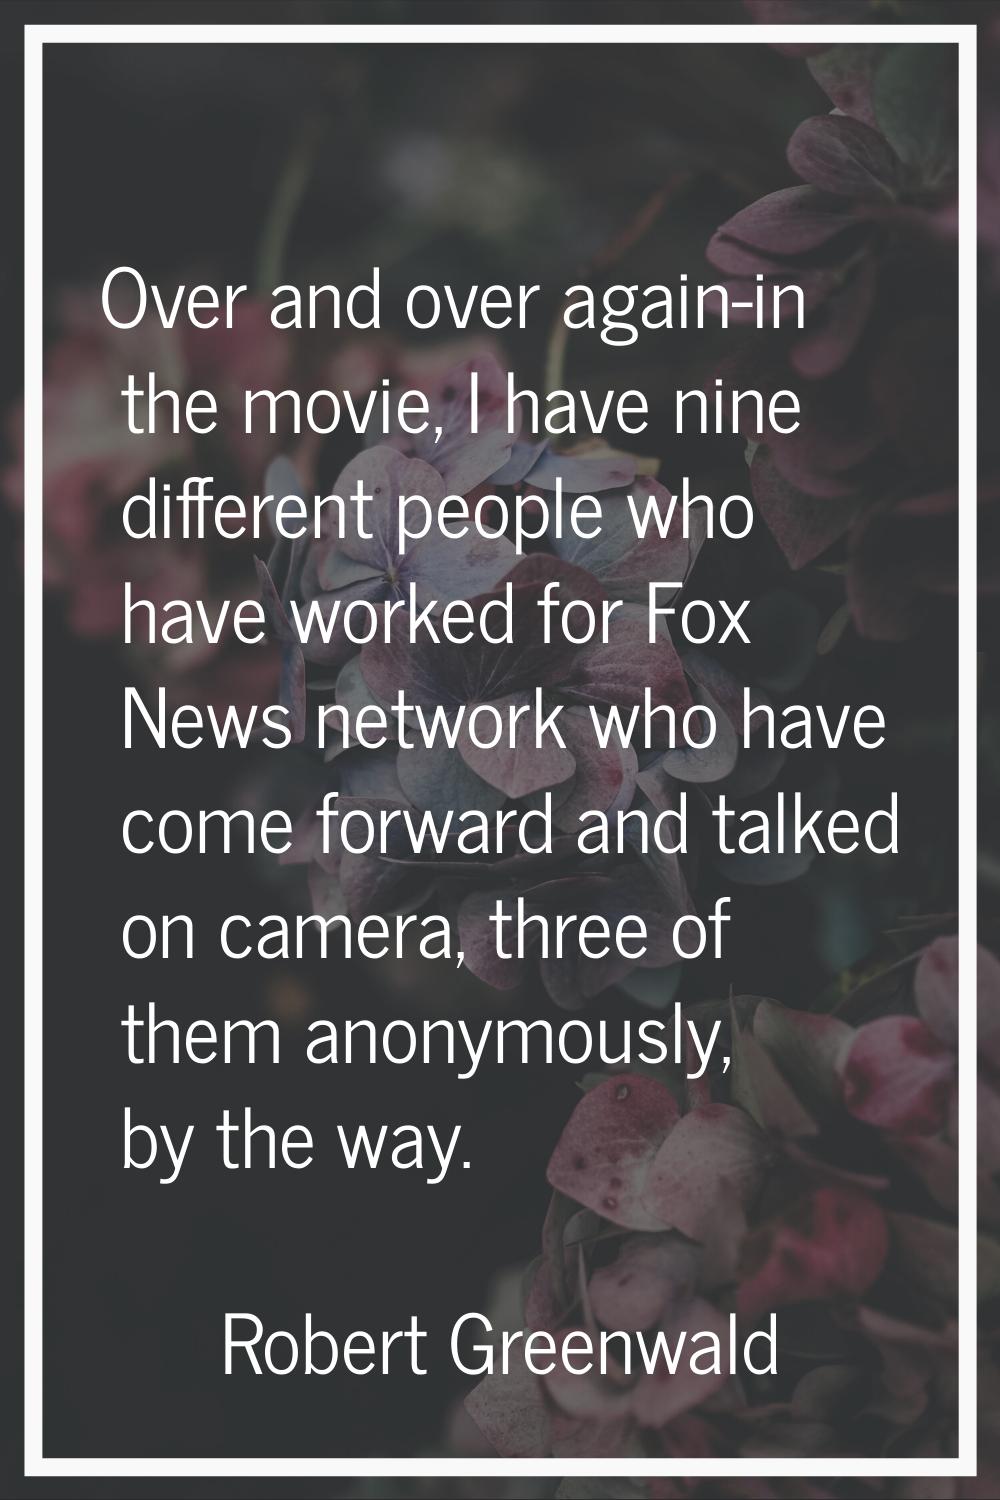 Over and over again-in the movie, I have nine different people who have worked for Fox News network